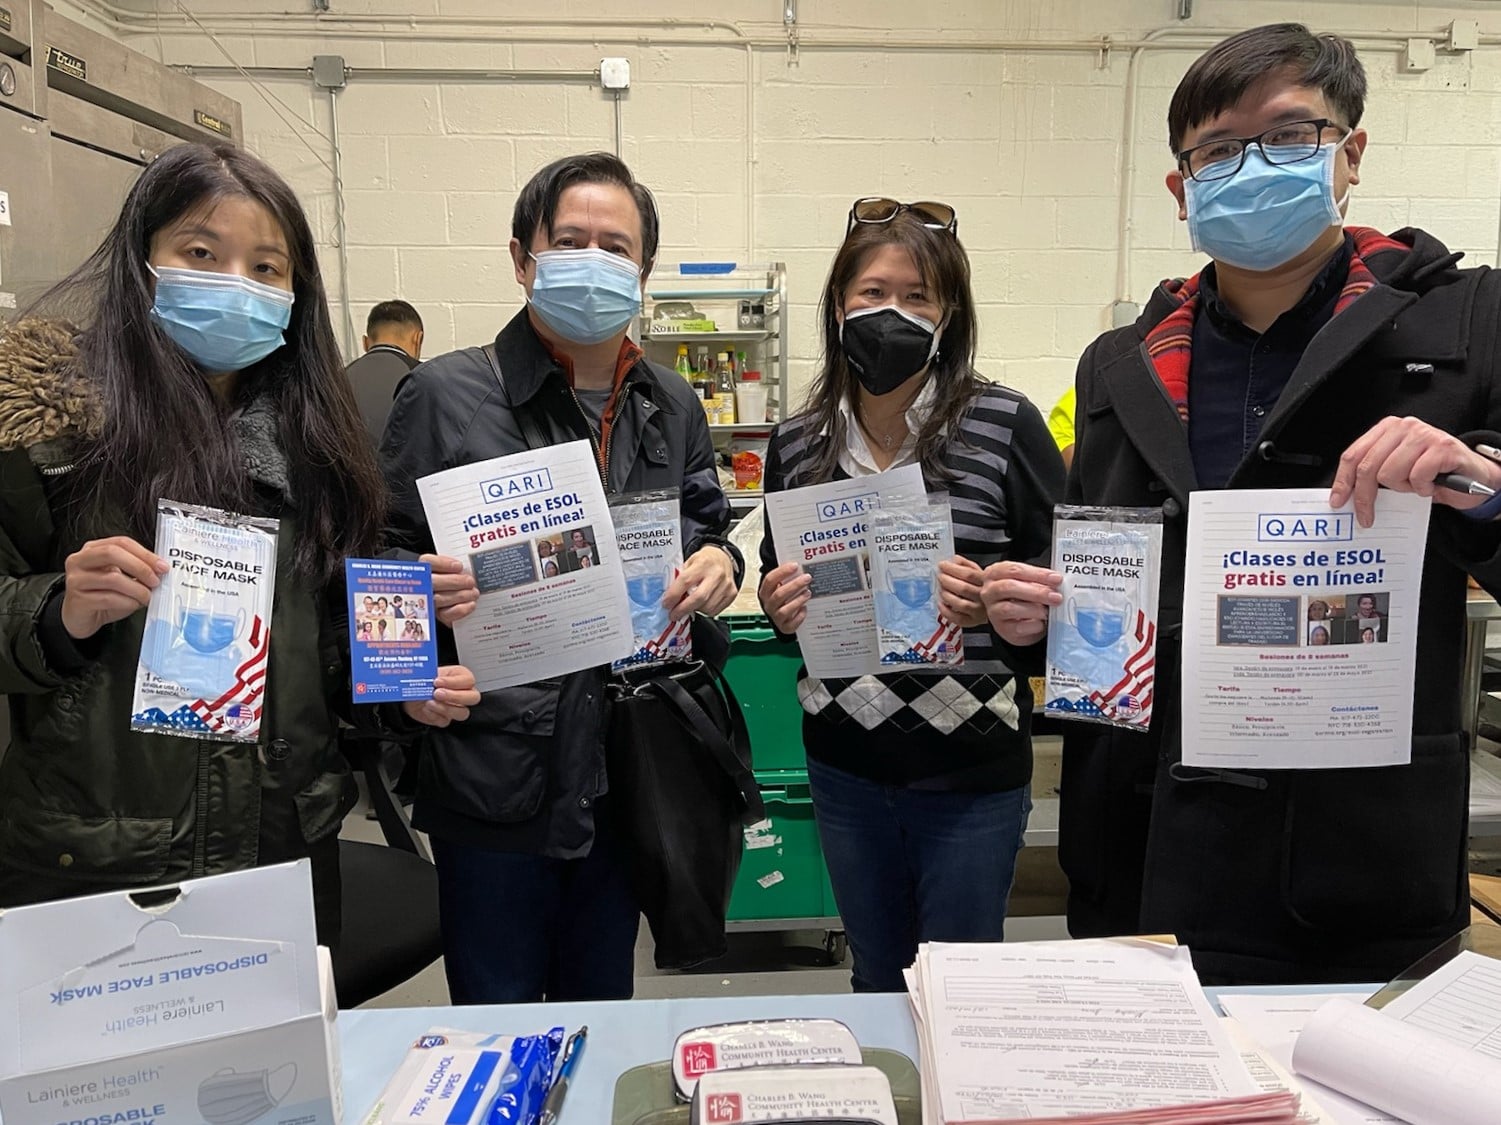 Four QARI volunteers wearing face masks and standing at a table covered in pamphlets about ESOL classes. Each volunteer is holding up a Spanish-language pamplet about ESOL classes.